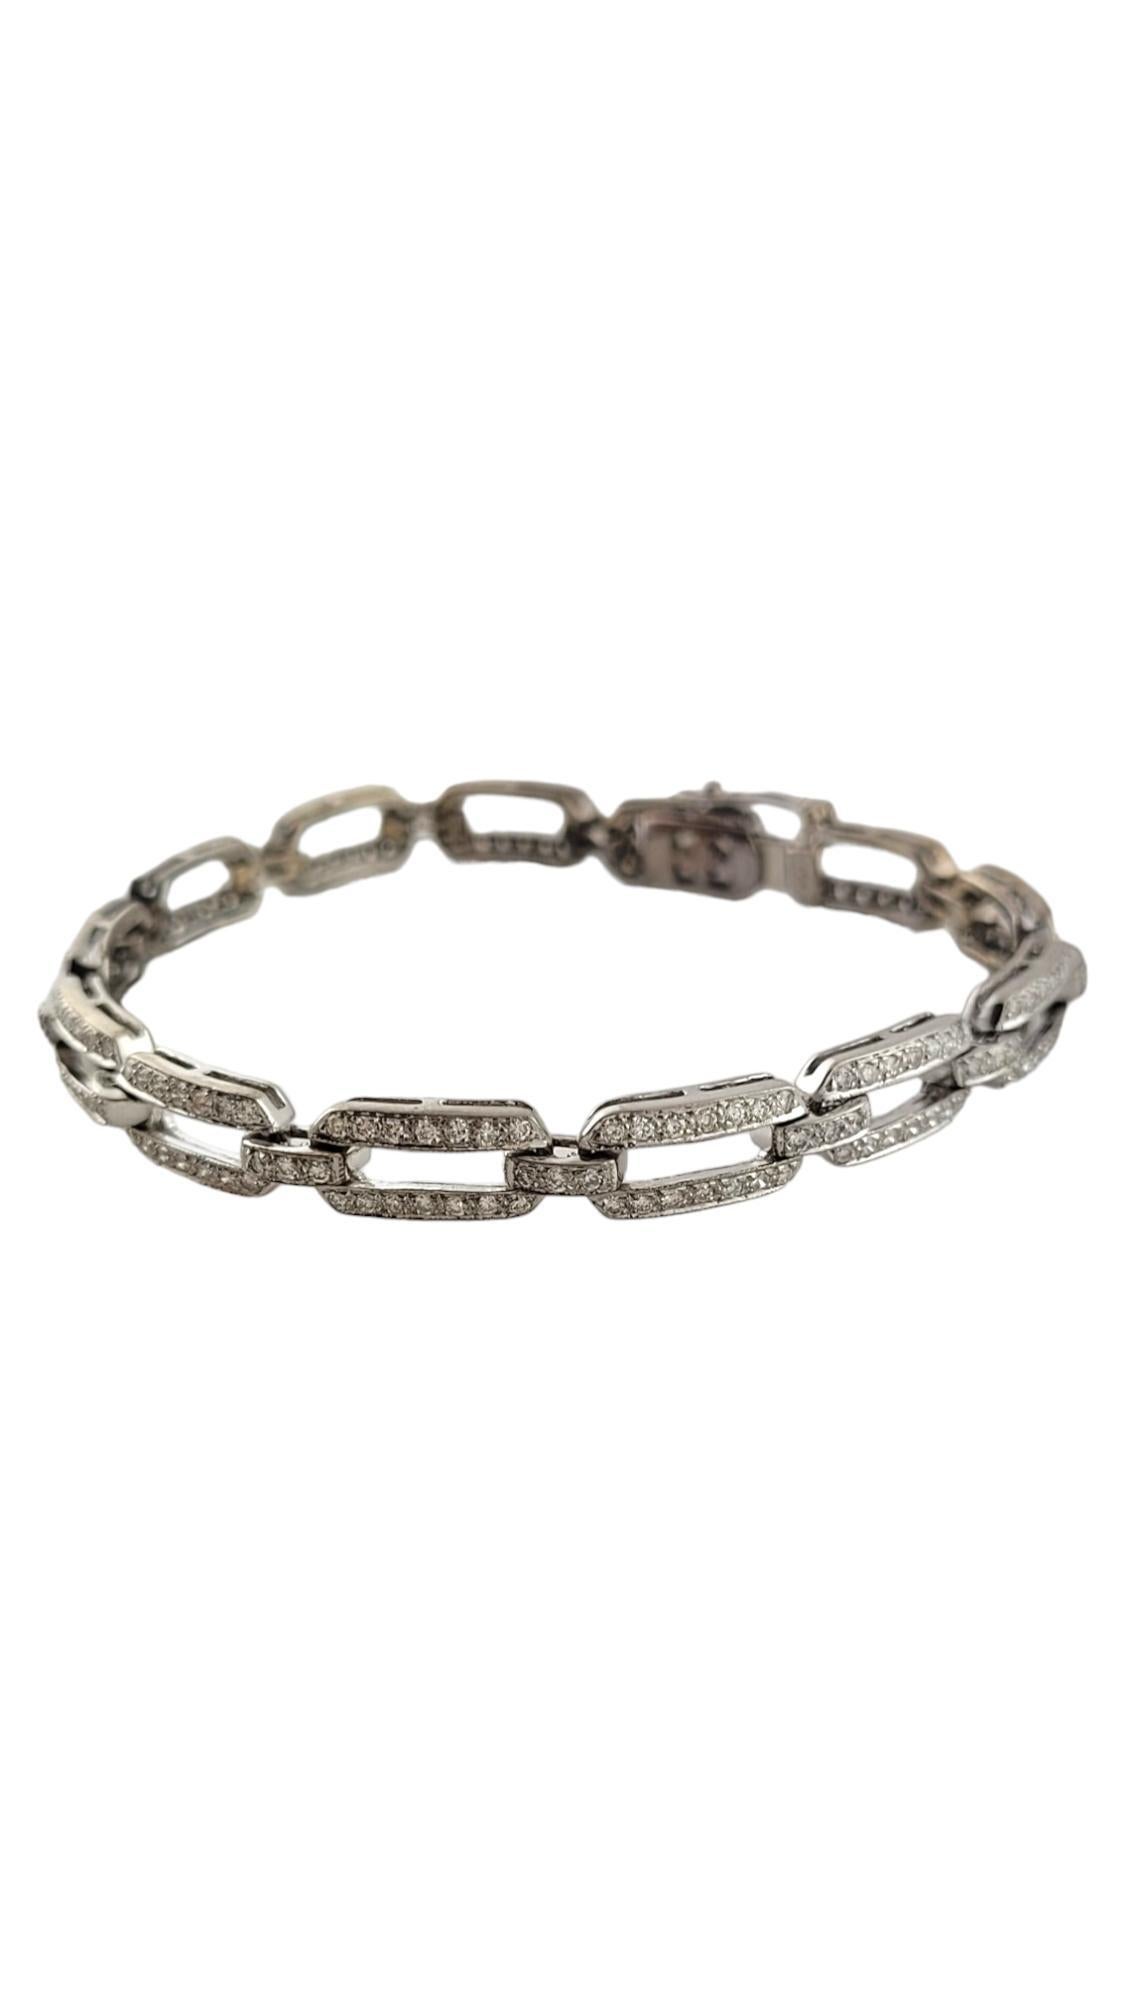 This sparkling bracelet features 221 round brilliant cut diamonds set in classic 18K white gold.  

Width:  5 mm.

Approximate total diamond weight:  1.10 ct.

Diamond color: I-J

Diamond clarity: SI1-VS2

Size: 6.25 inches

Weight:  9.5 dwt. / 